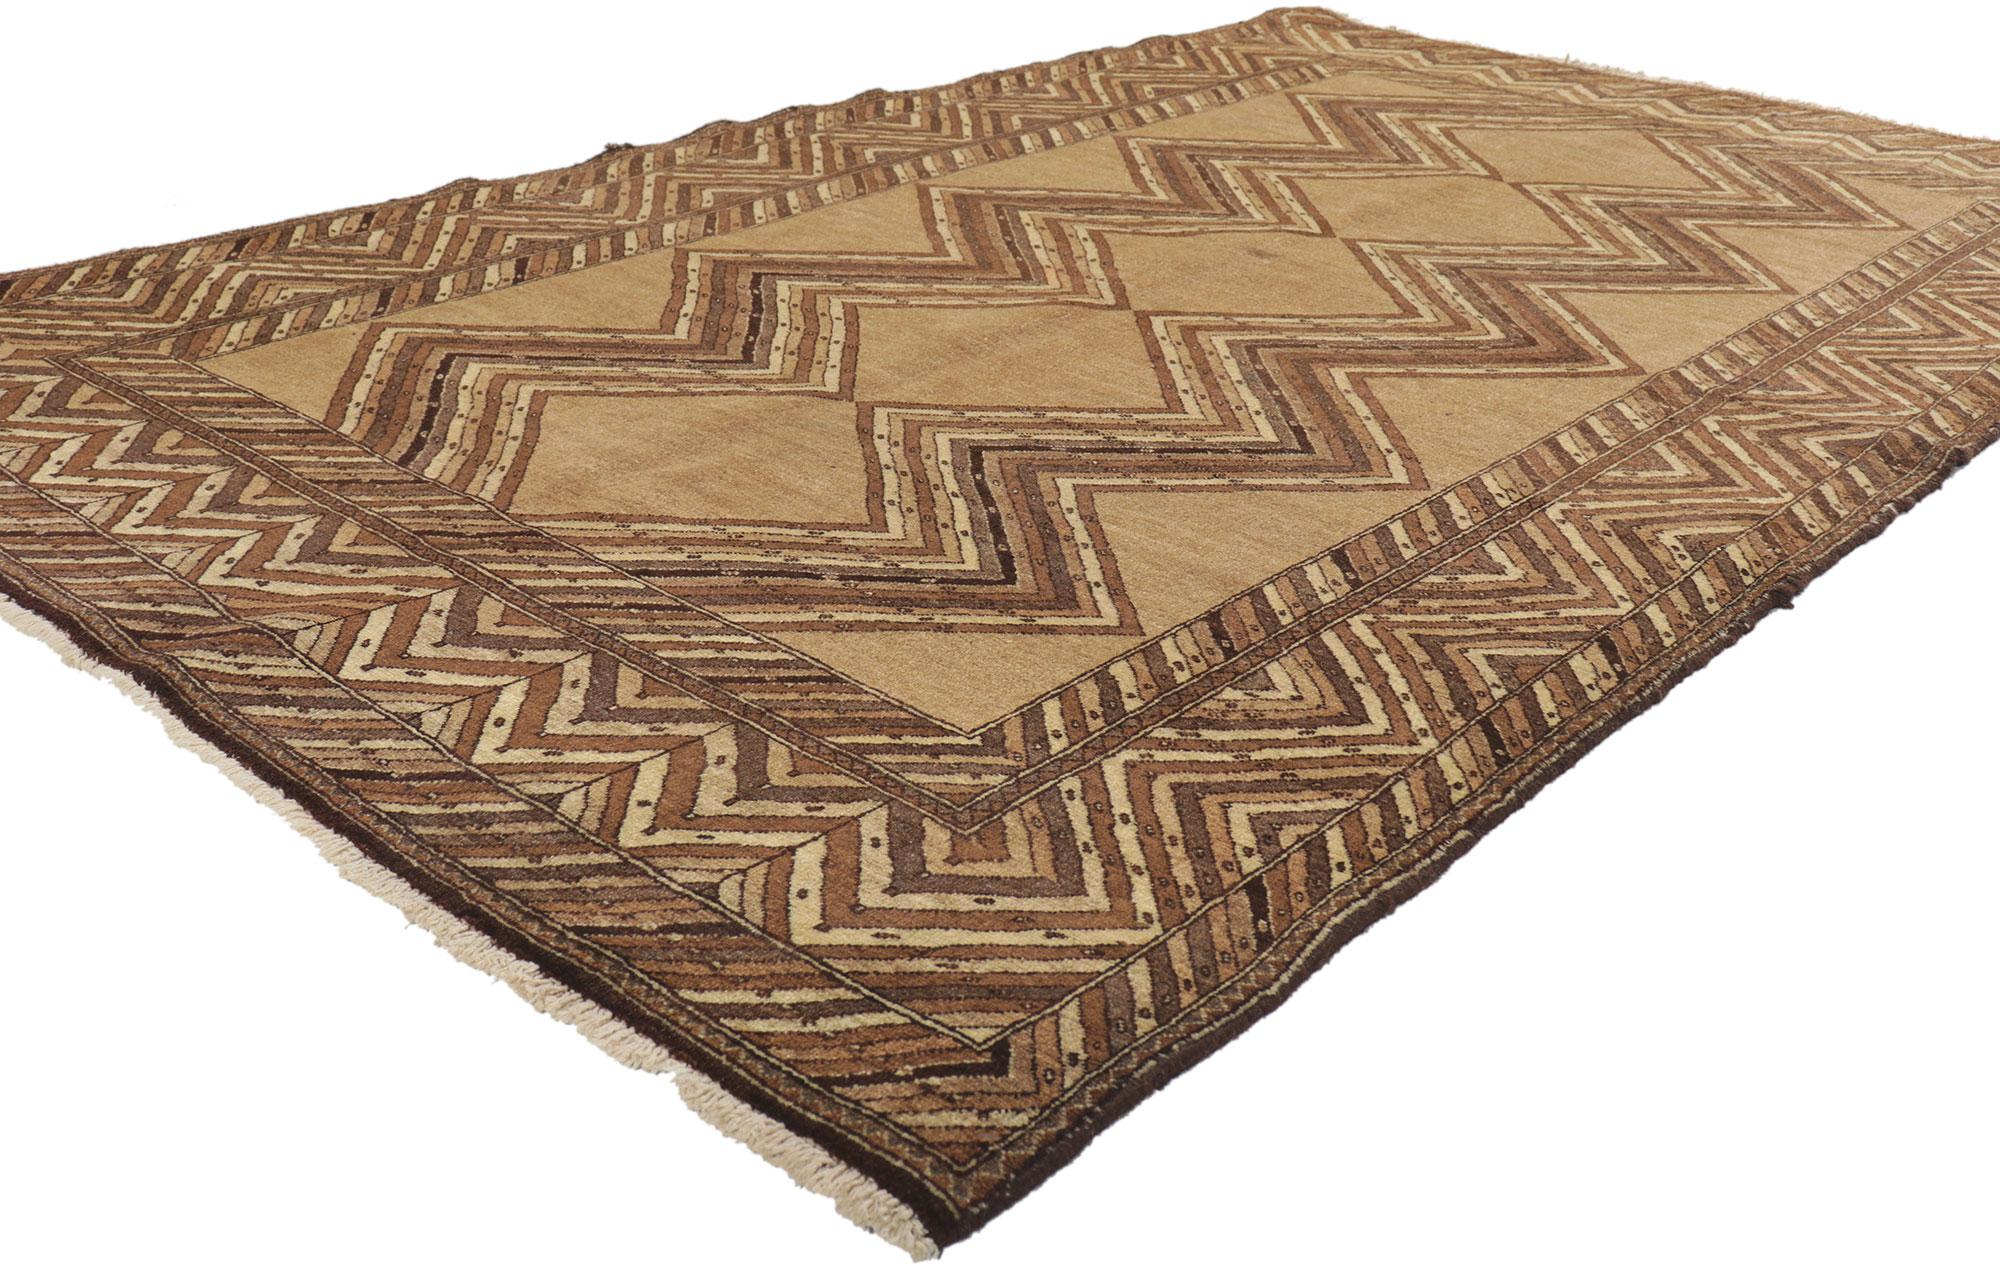 75143 Vintage Persian Semnan Rug, 04'05 x 07'07.
Emanating nomadic charm with incredible detail and texture, this hand knotted wool vintage Persian Semnan rug is a captivating vision of woven beauty. The tribal design and warm earth-tone colors